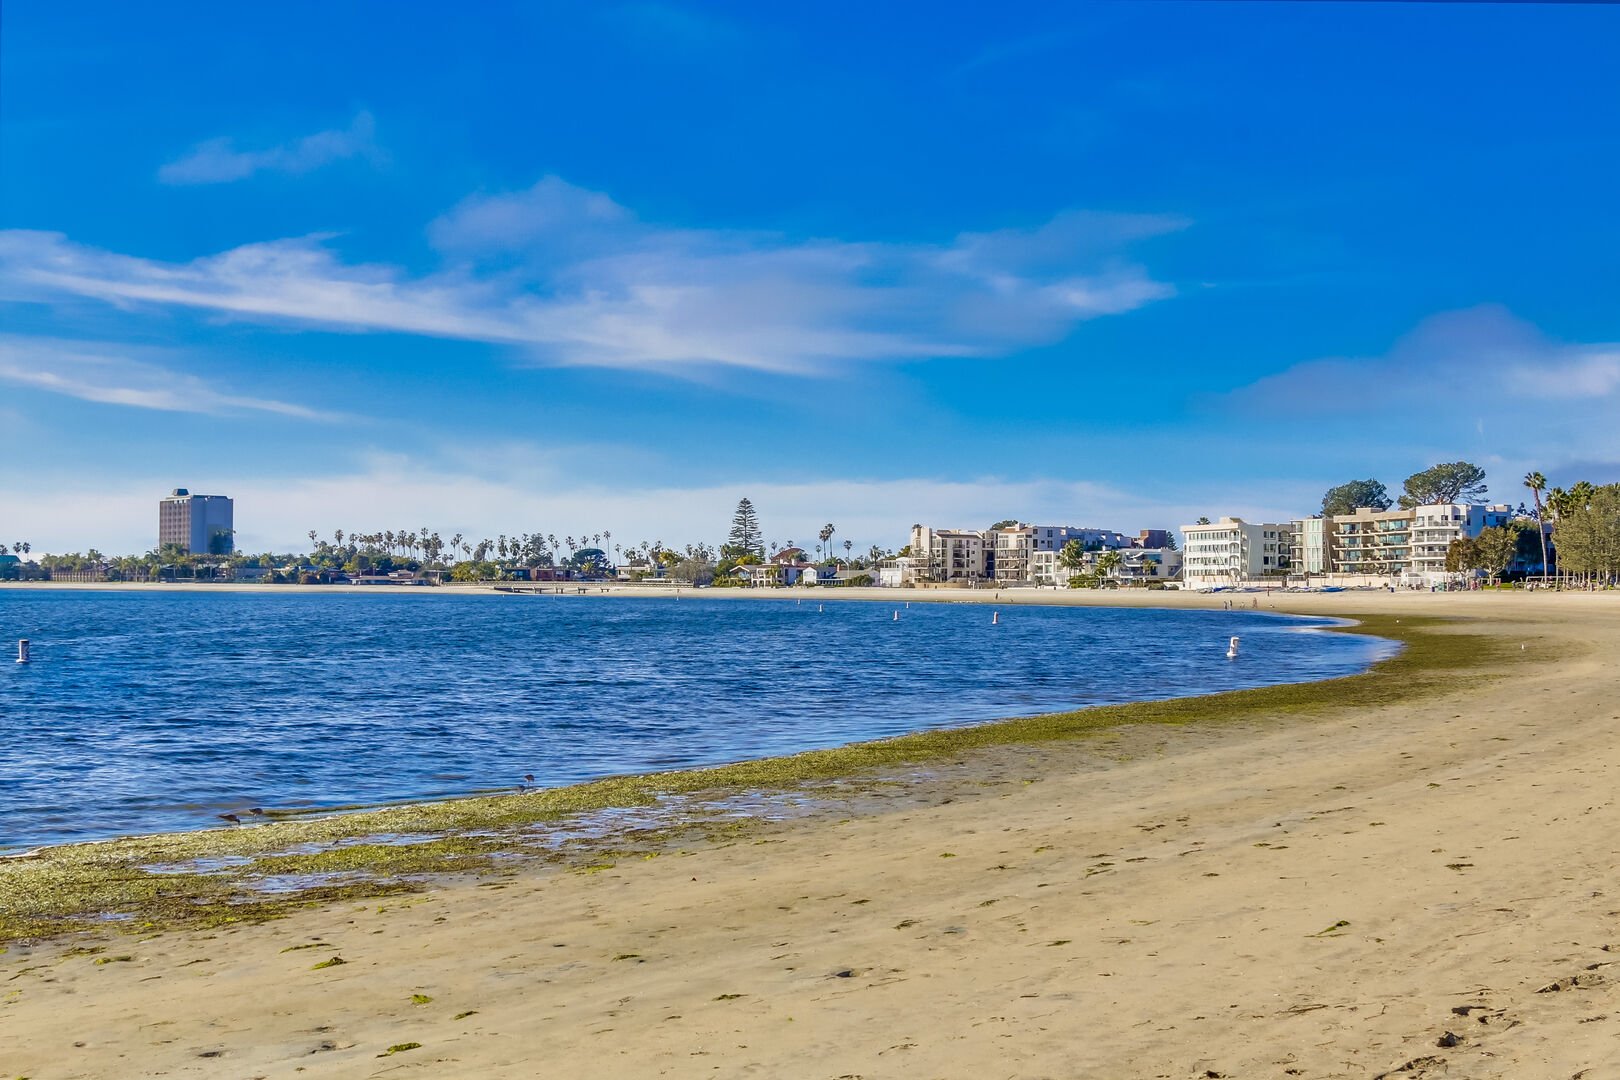 View of Mission Bay from boardwalk